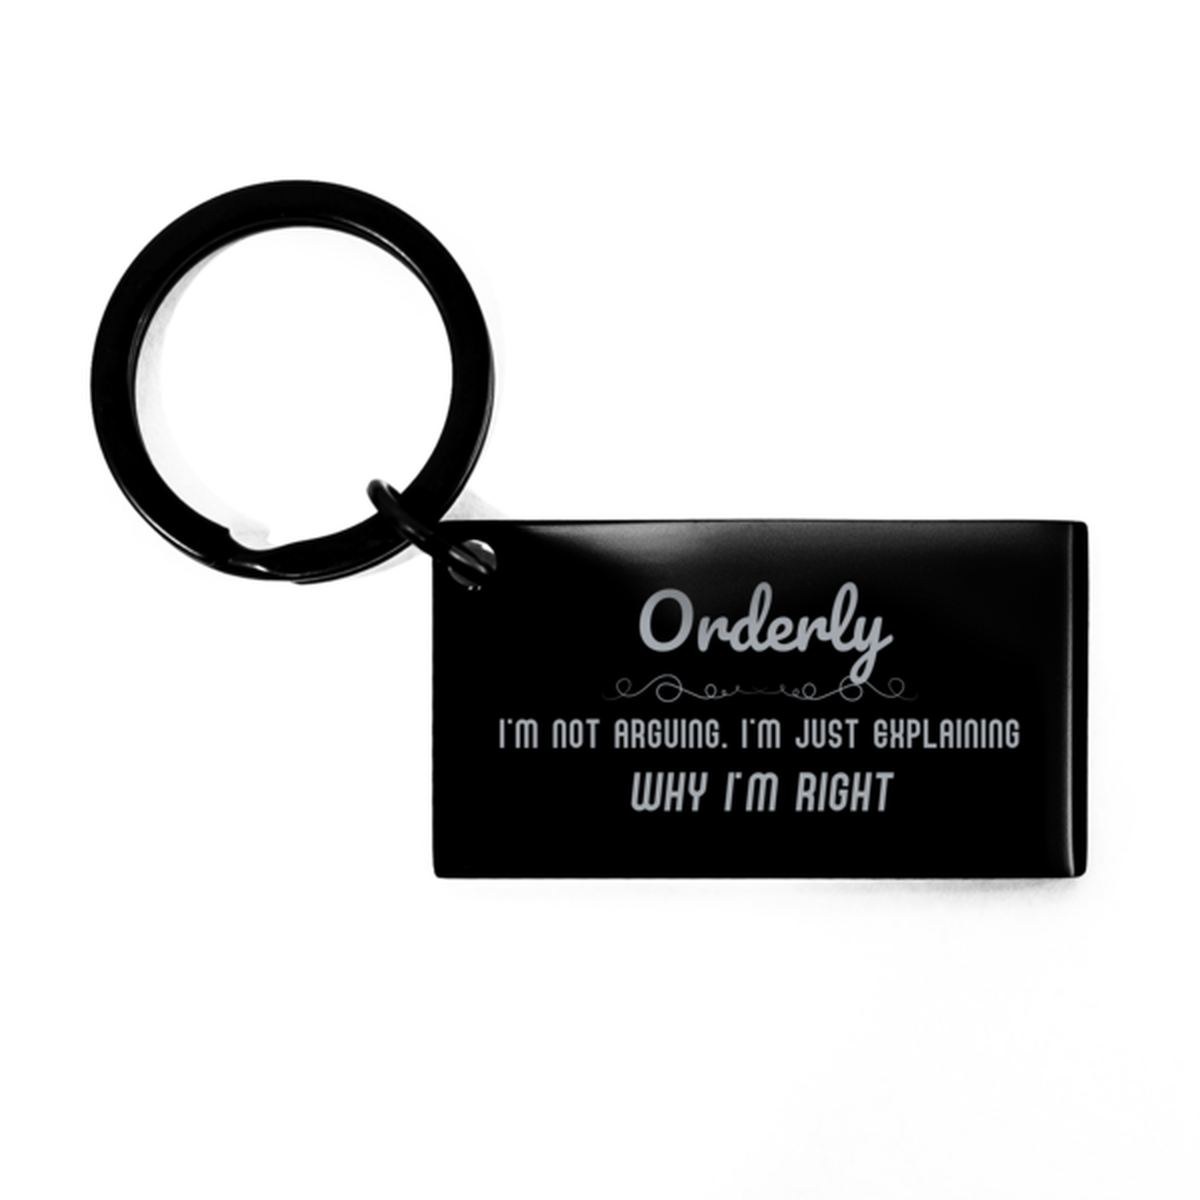 Orderly I'm not Arguing. I'm Just Explaining Why I'm RIGHT Keychain, Funny Saying Quote Orderly Gifts For Orderly Graduation Birthday Christmas Gifts for Men Women Coworker